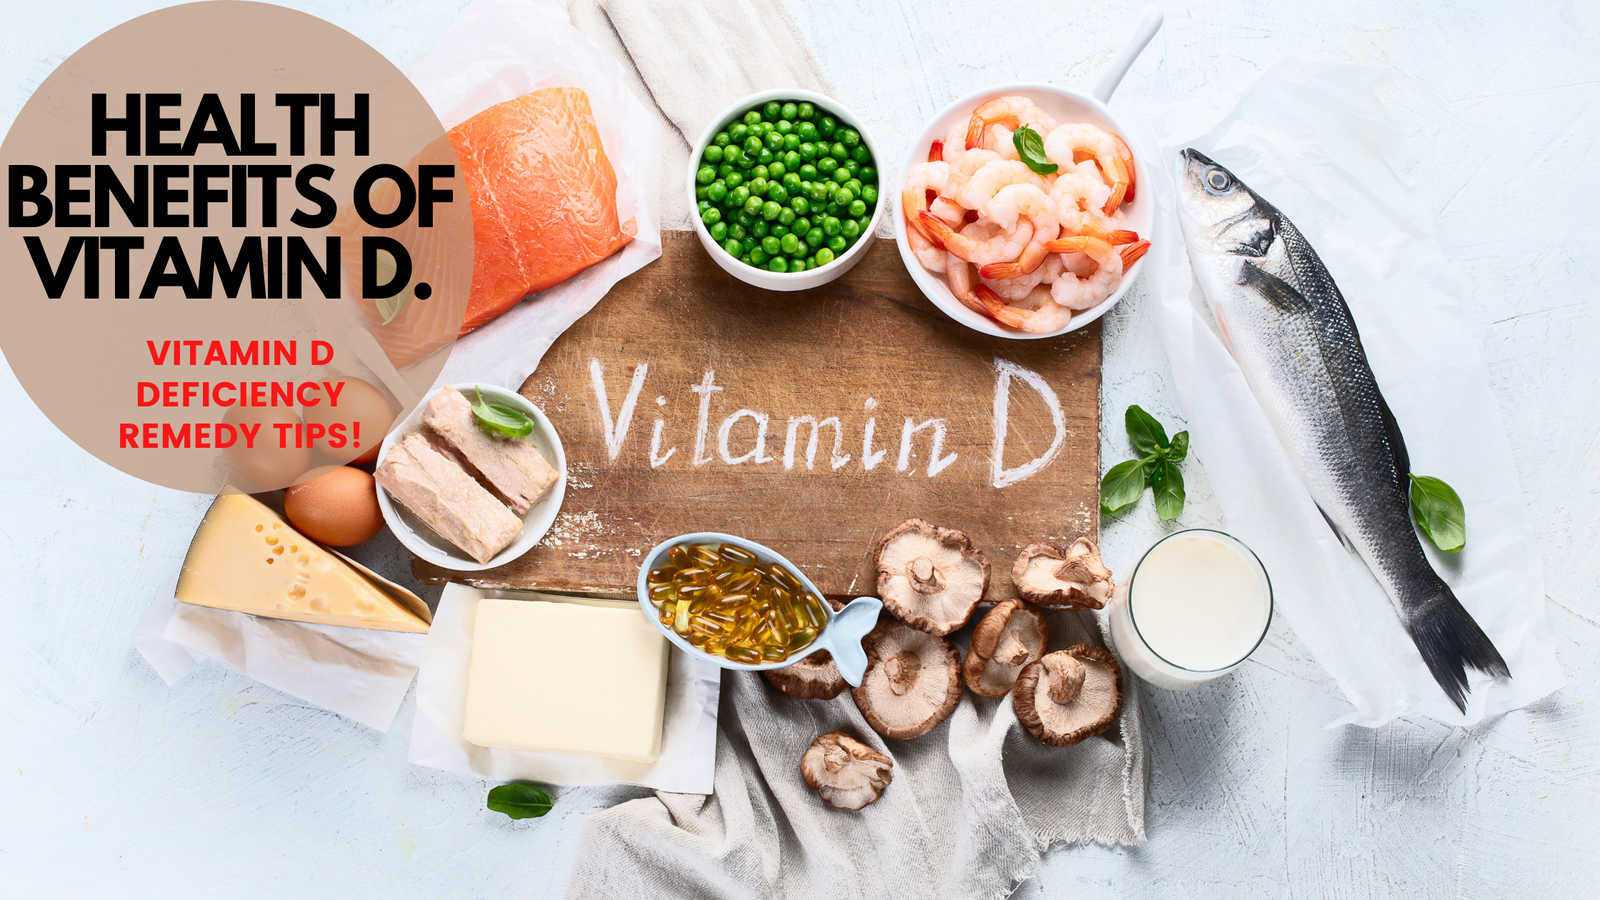 You are currently viewing HEALTH BENEFITS OF VITAMIN D: Vitamin D deficiency remedy tips